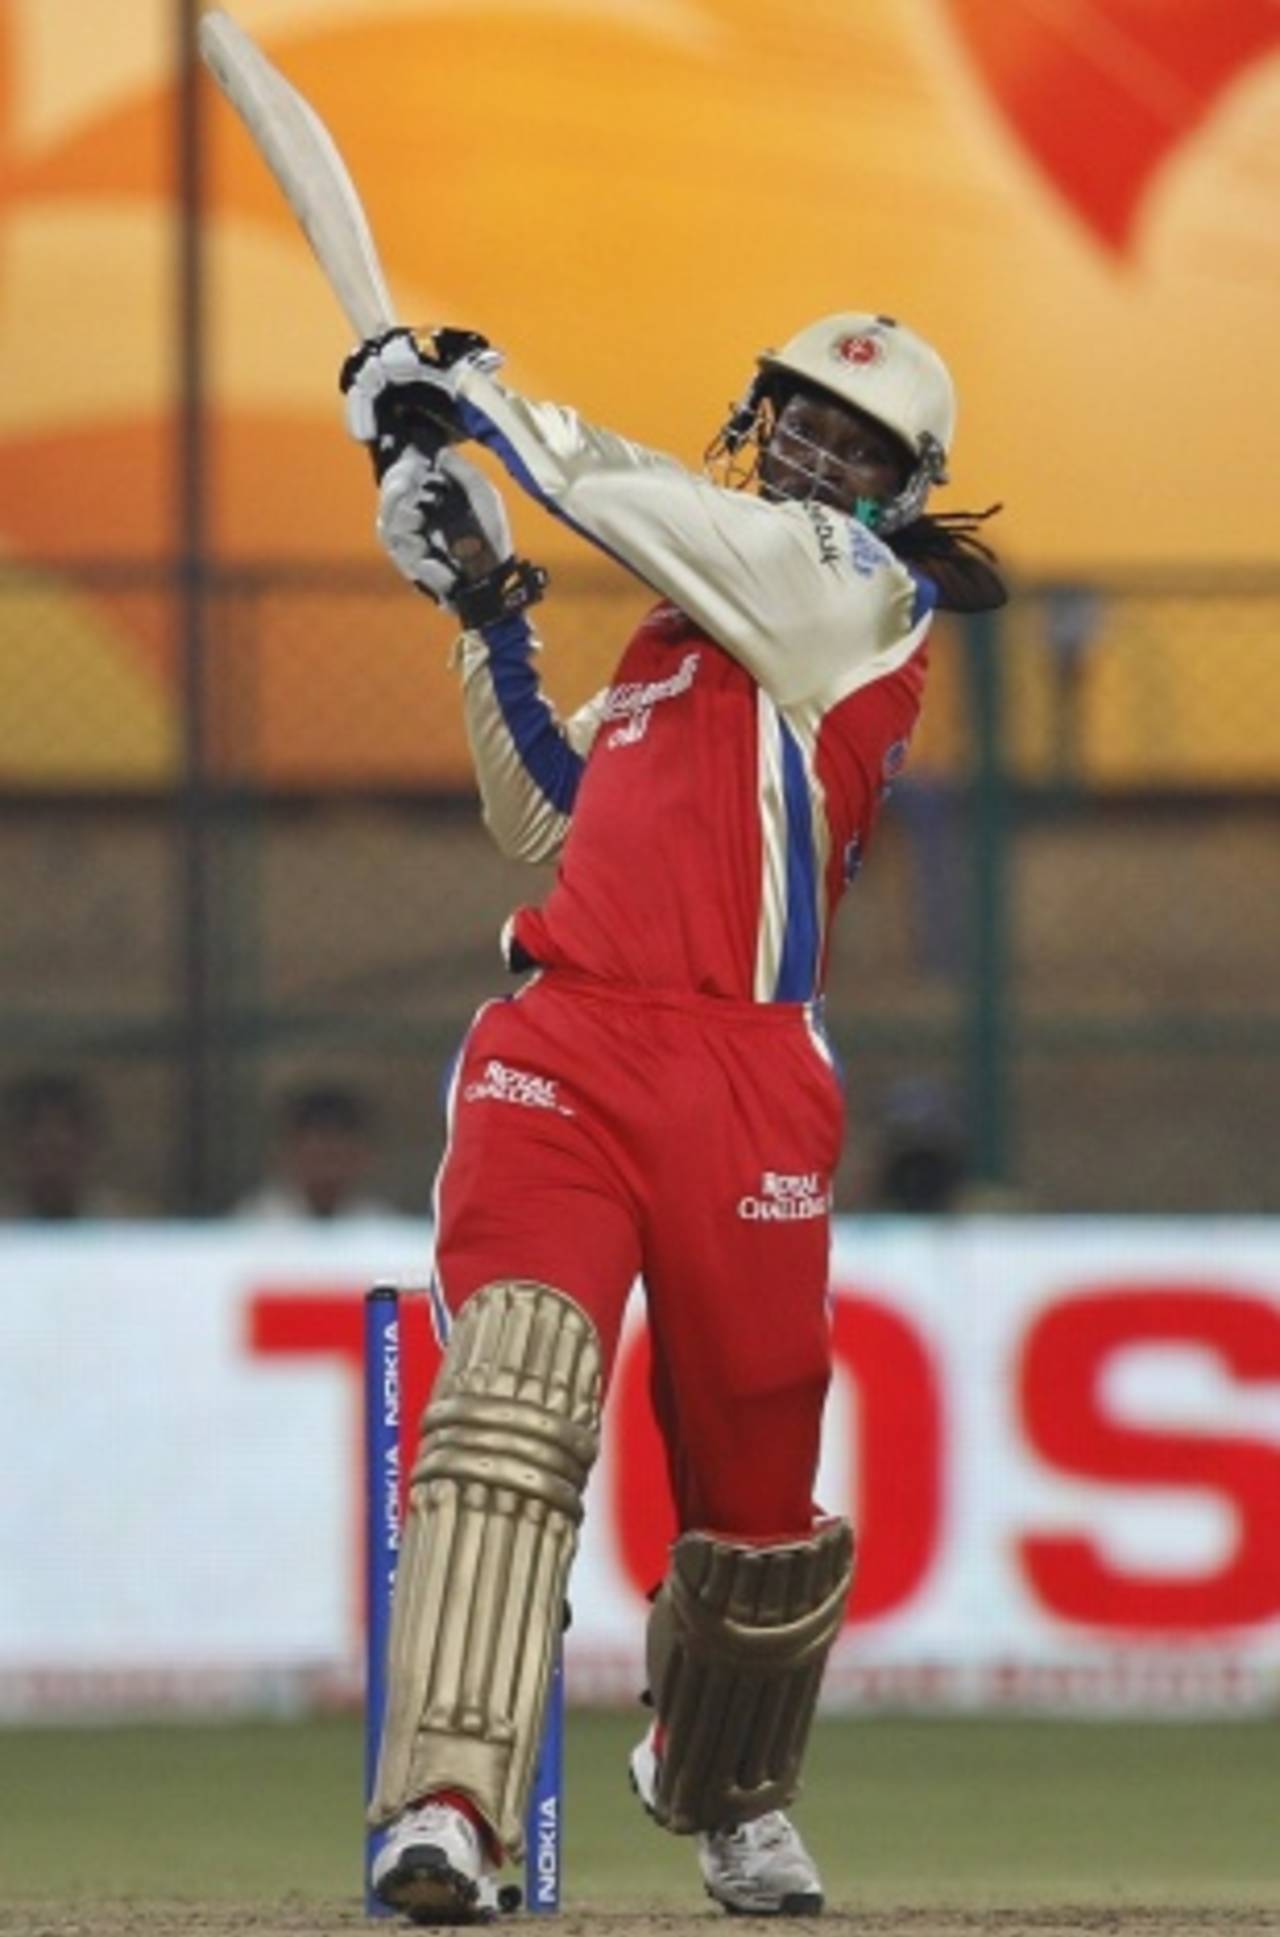 Several Zimbabwean franchises have expressed an interest in signing Chris Gayle for their Twenty20 tournament&nbsp;&nbsp;&bull;&nbsp;&nbsp;Associated Press